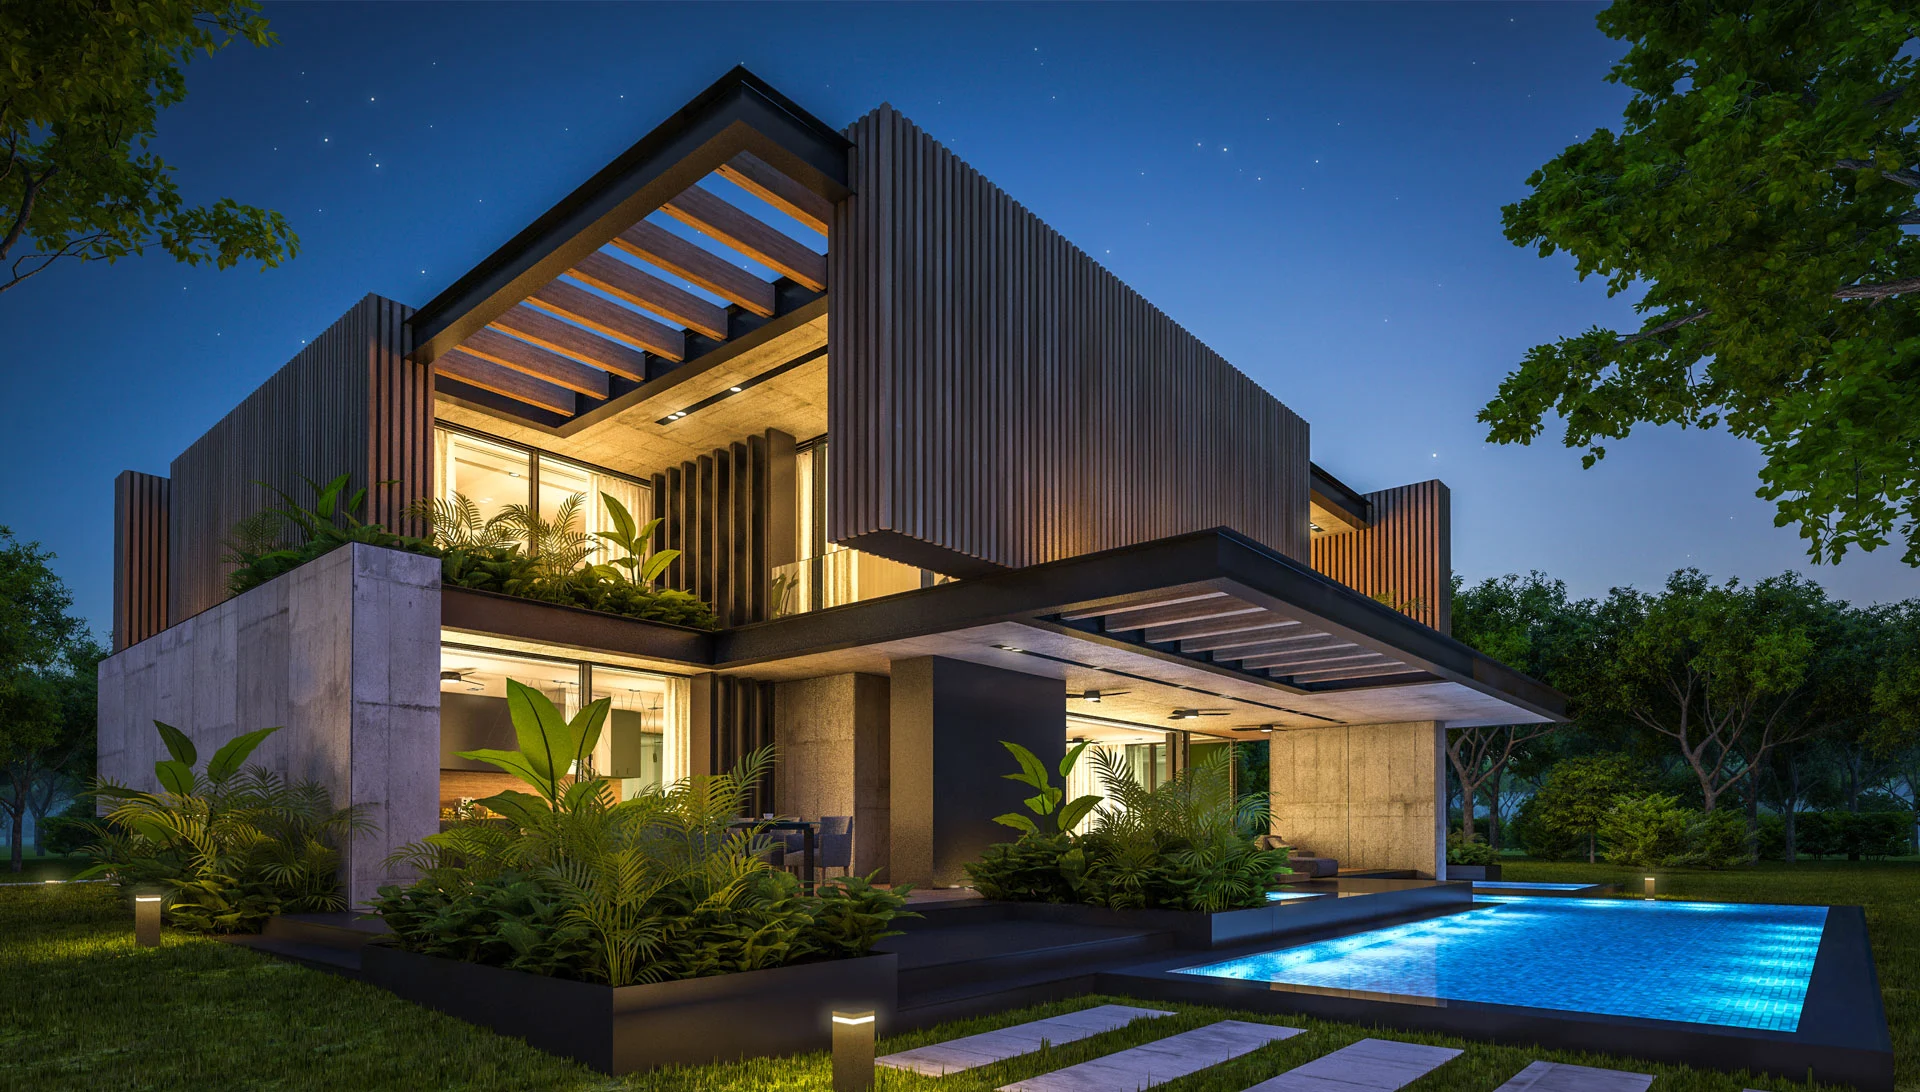 Contemporary luxury house at dusk